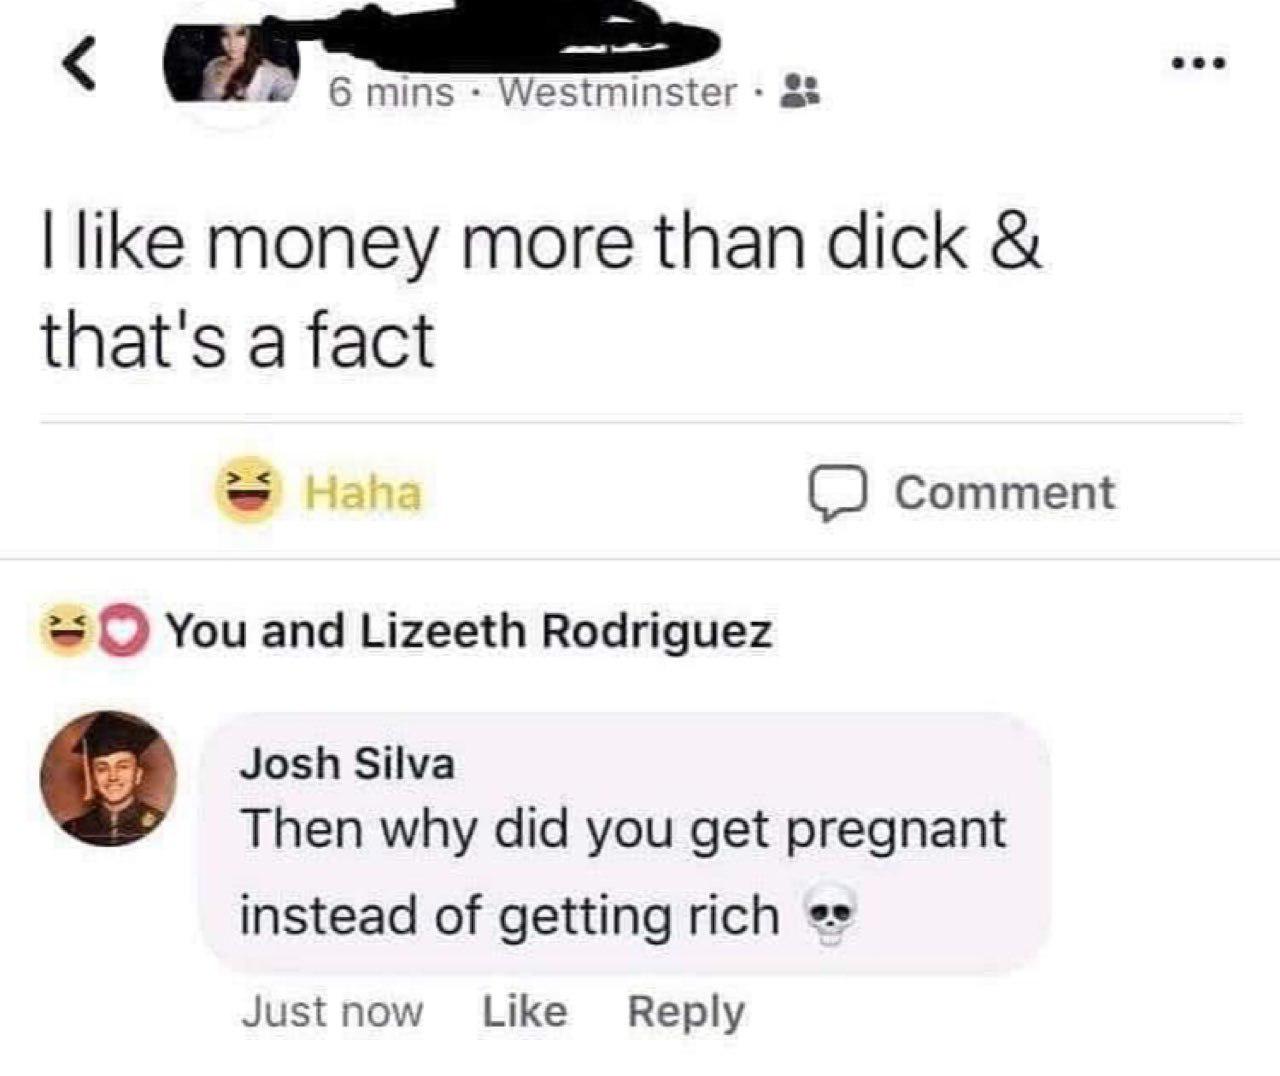 dank meme - document - 6 mins Westminster I money more than dick & that's a fact Haha Comment You and Lizeeth Rodriguez Josh Silva Then why did you get pregnant instead of getting rich Just now